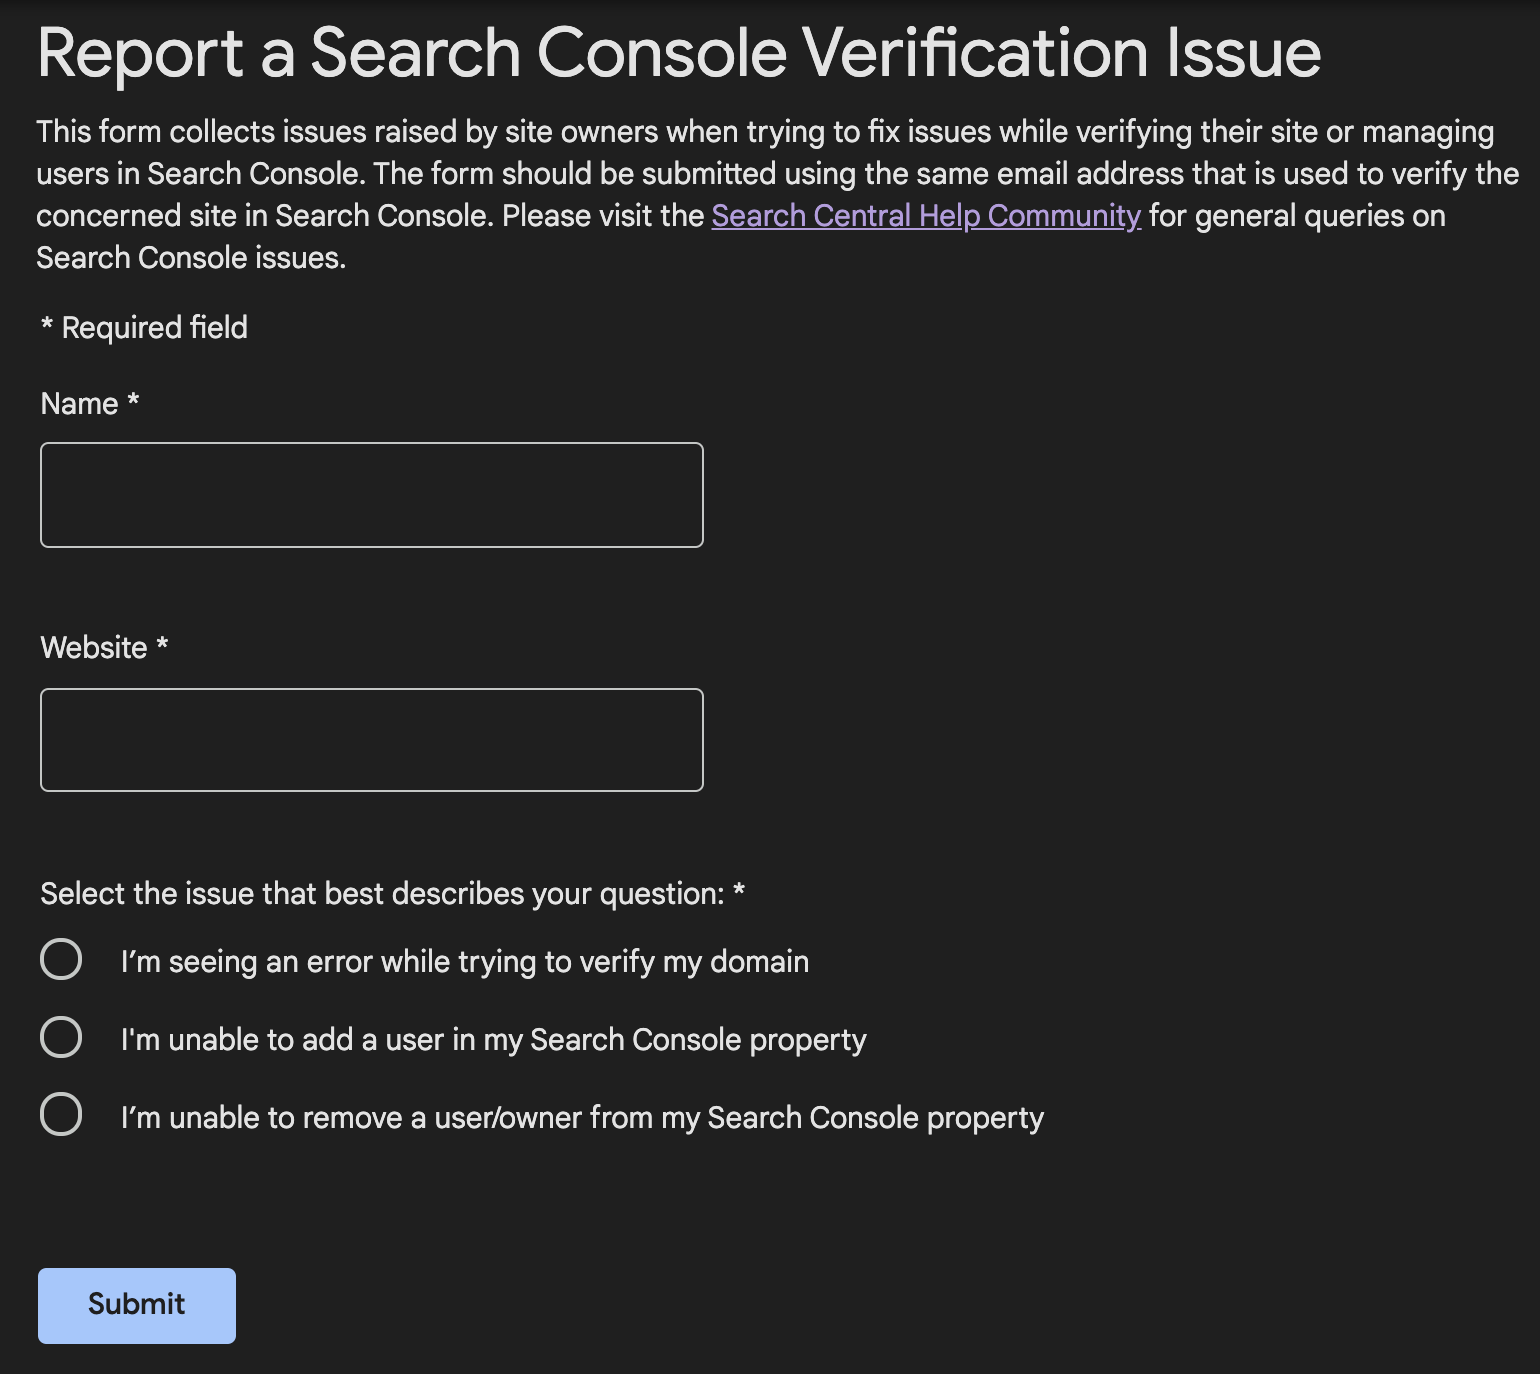 Report a Search Console Verification Issue